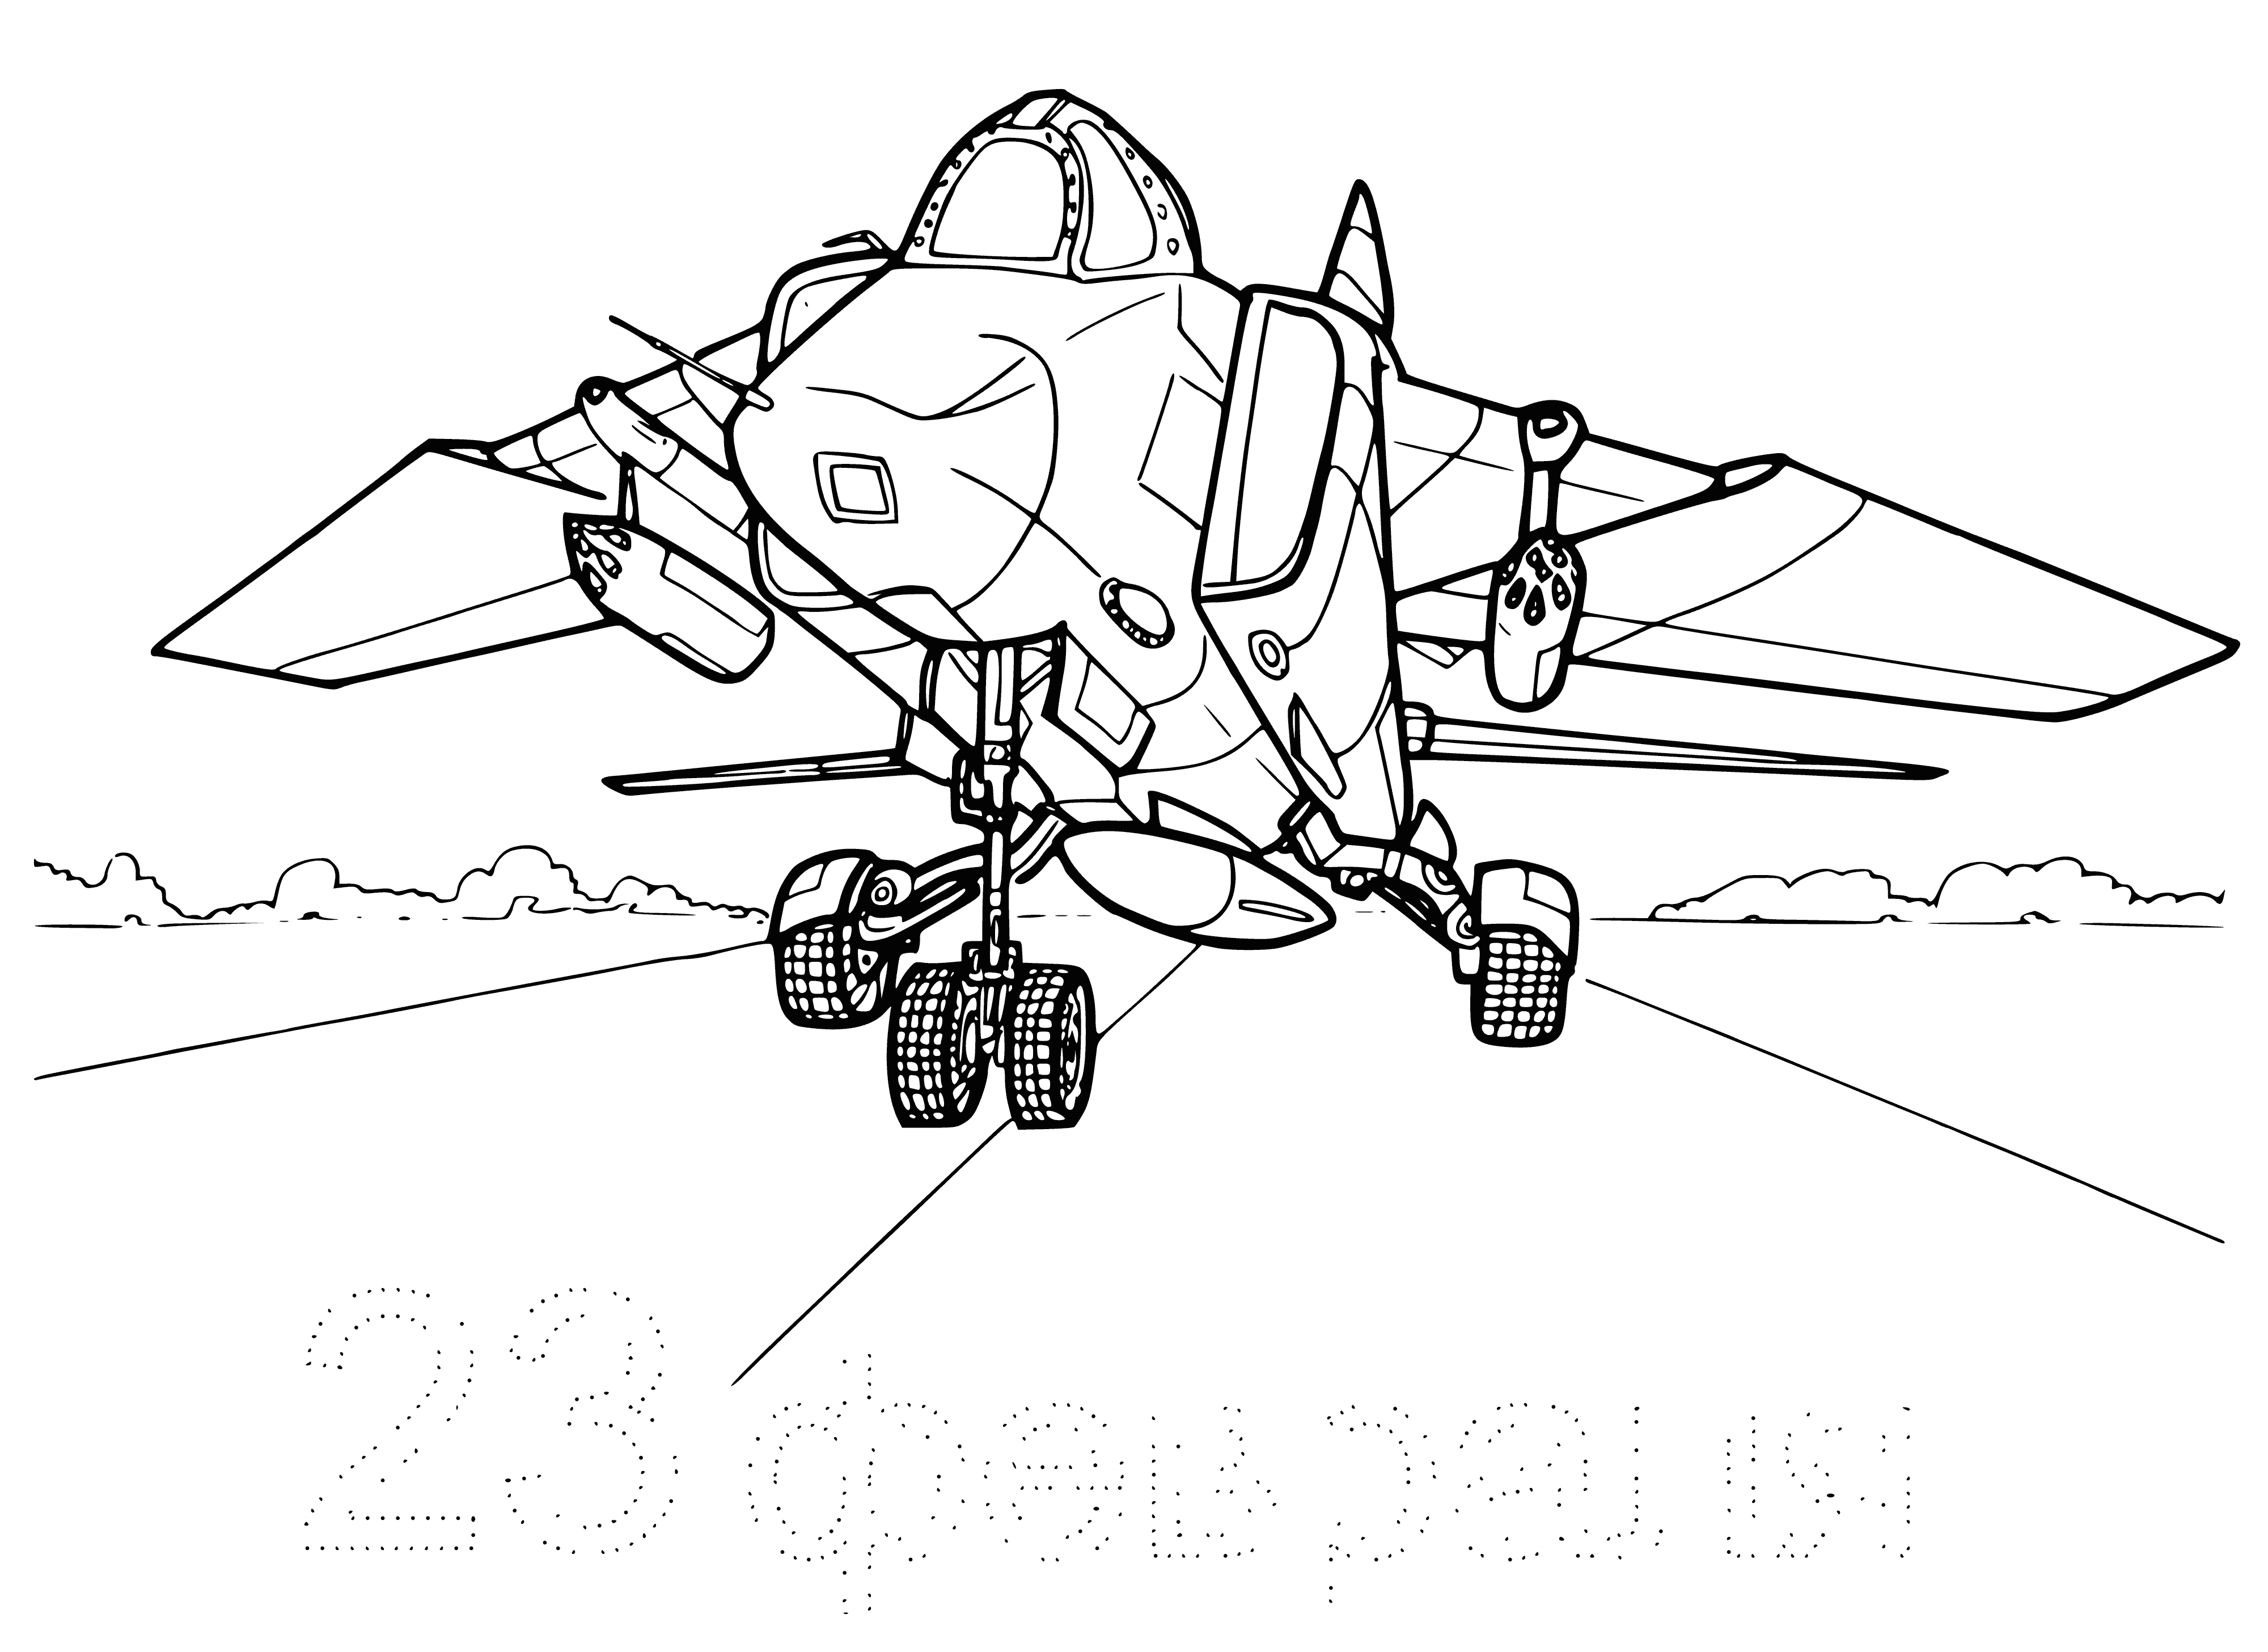 Interceptor fighter coloring page